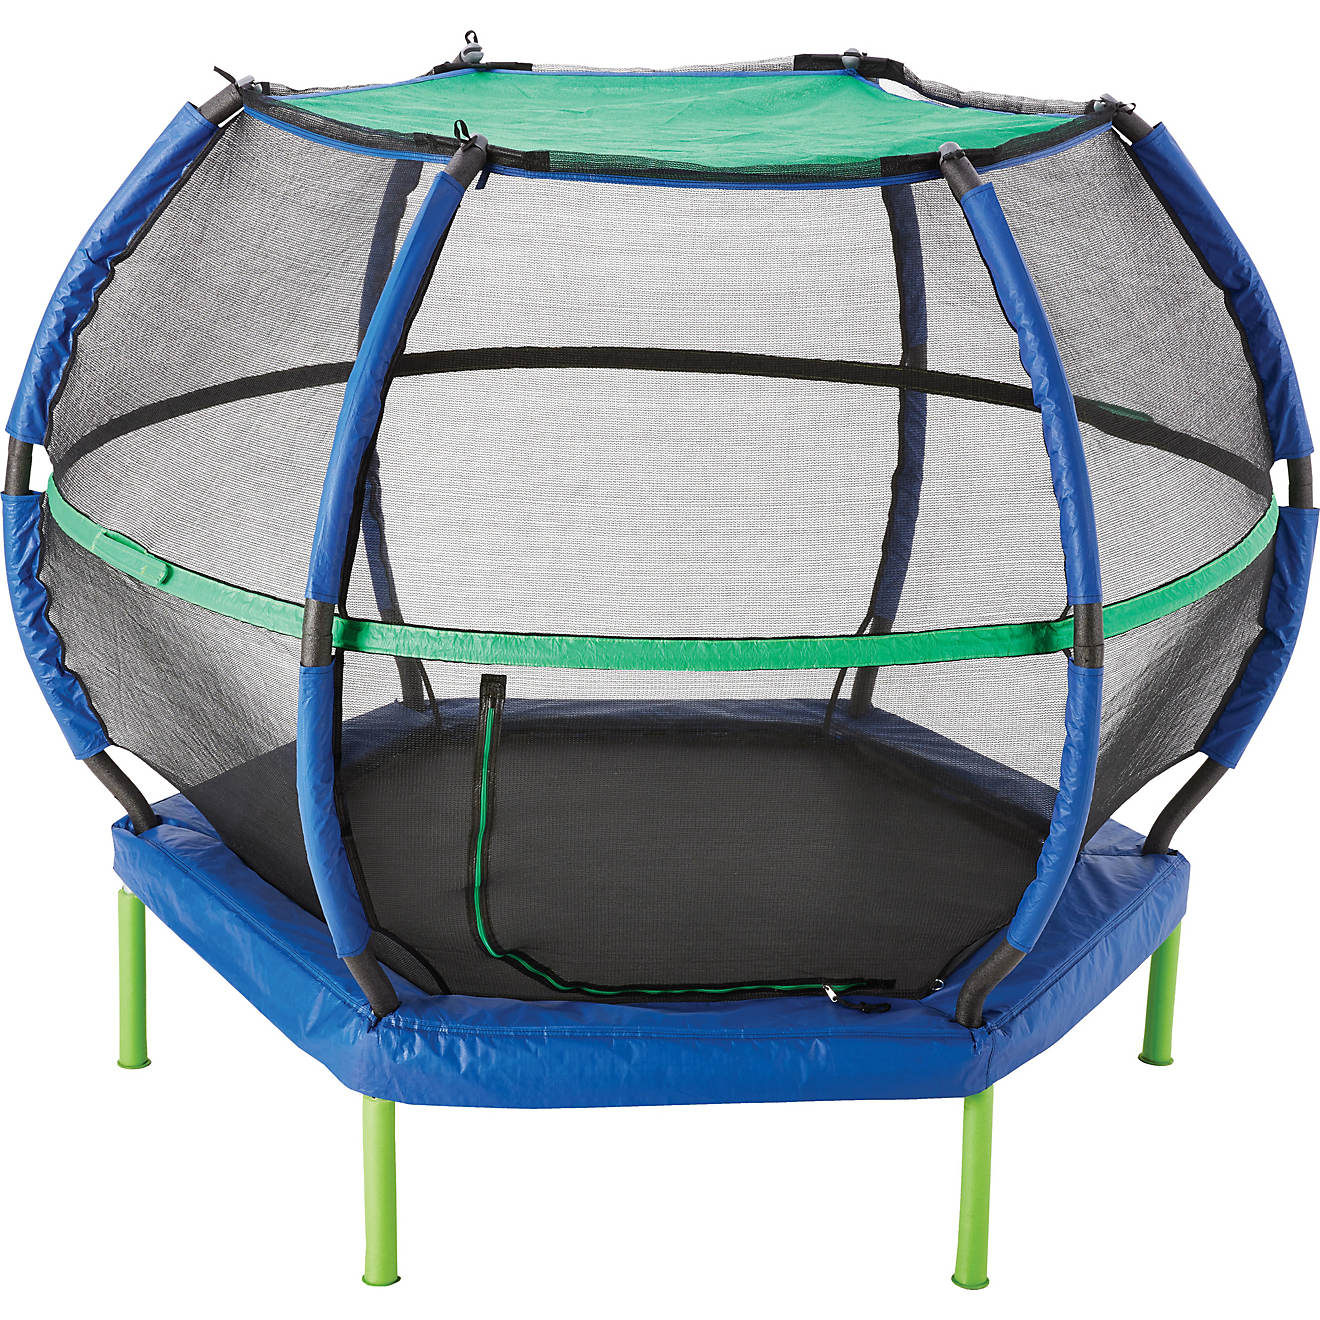 AGame Sunshade 7 ft Trampoline